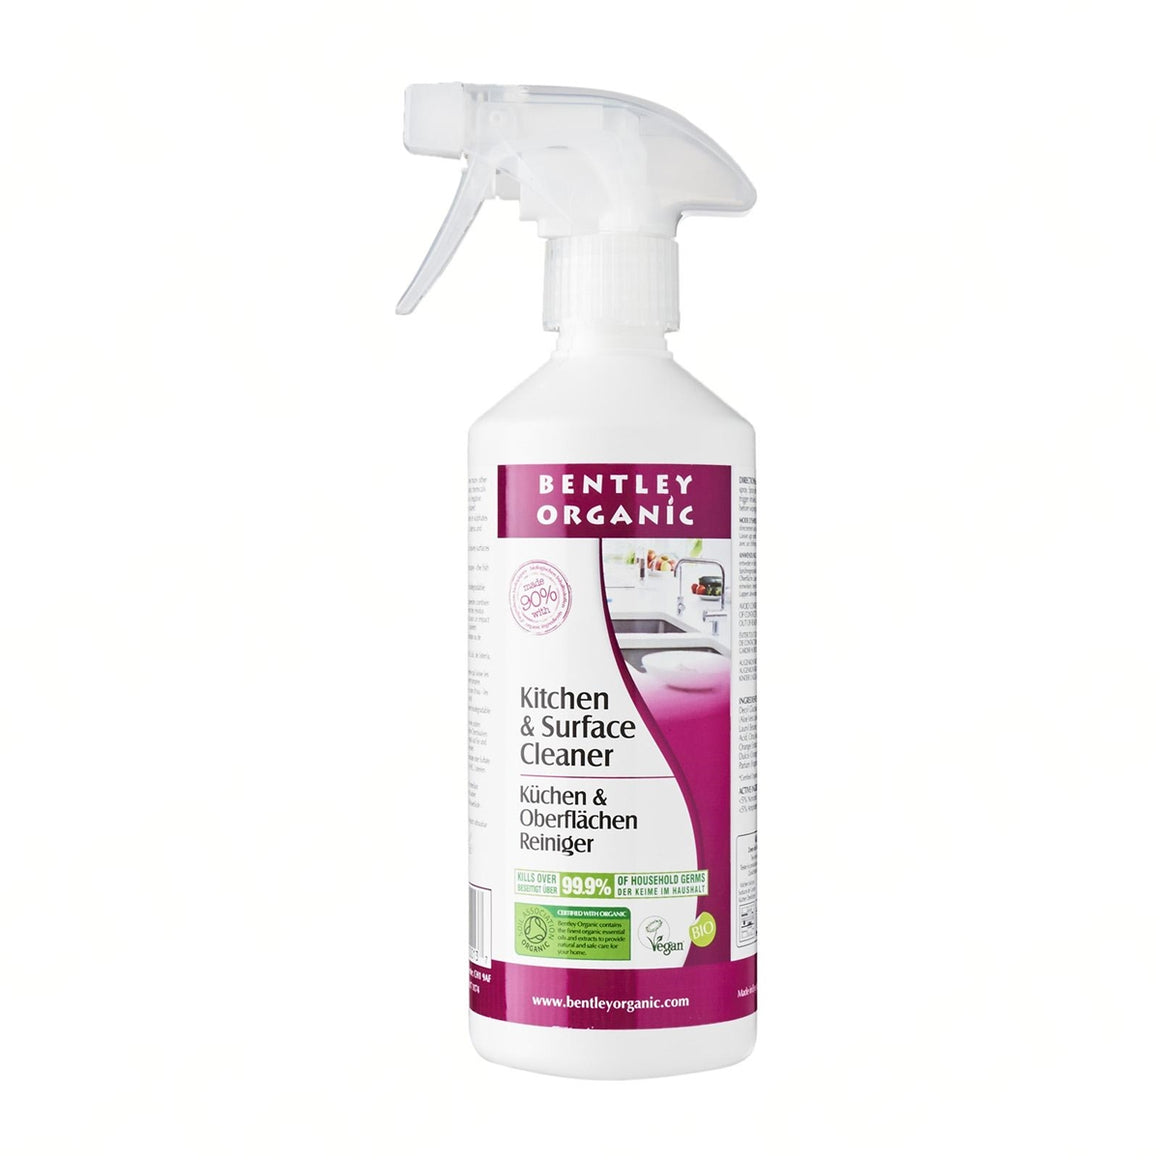 Organic Kitchen And Surface Cleaner - Aldha